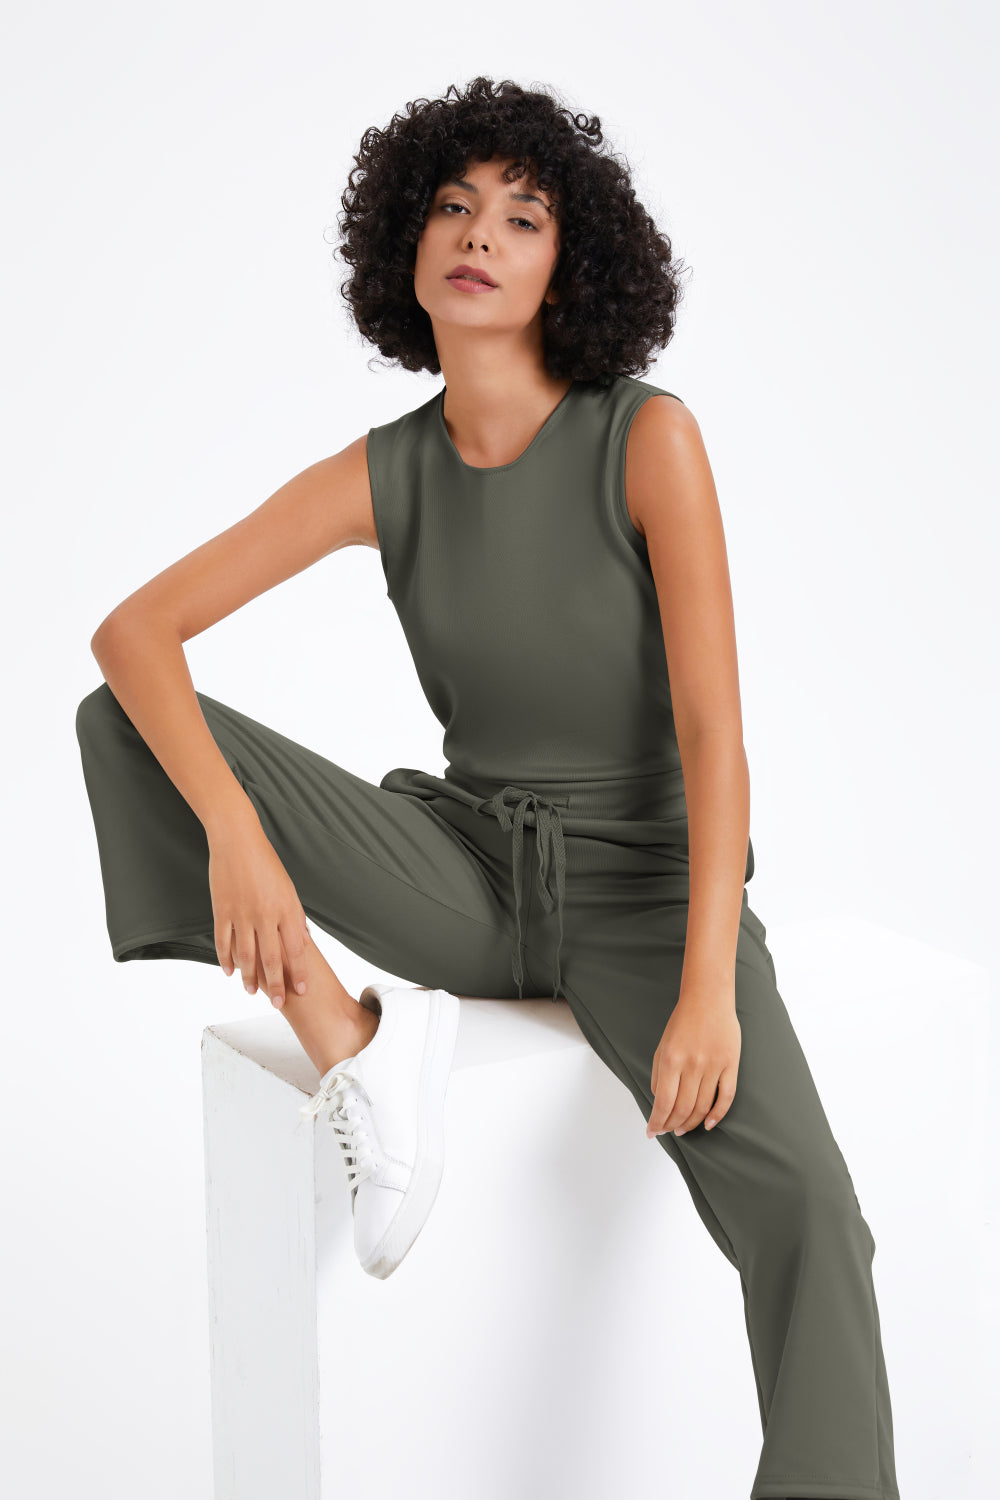 Love the comfy and trendy air Anrabess Air Essentials jumpsuits